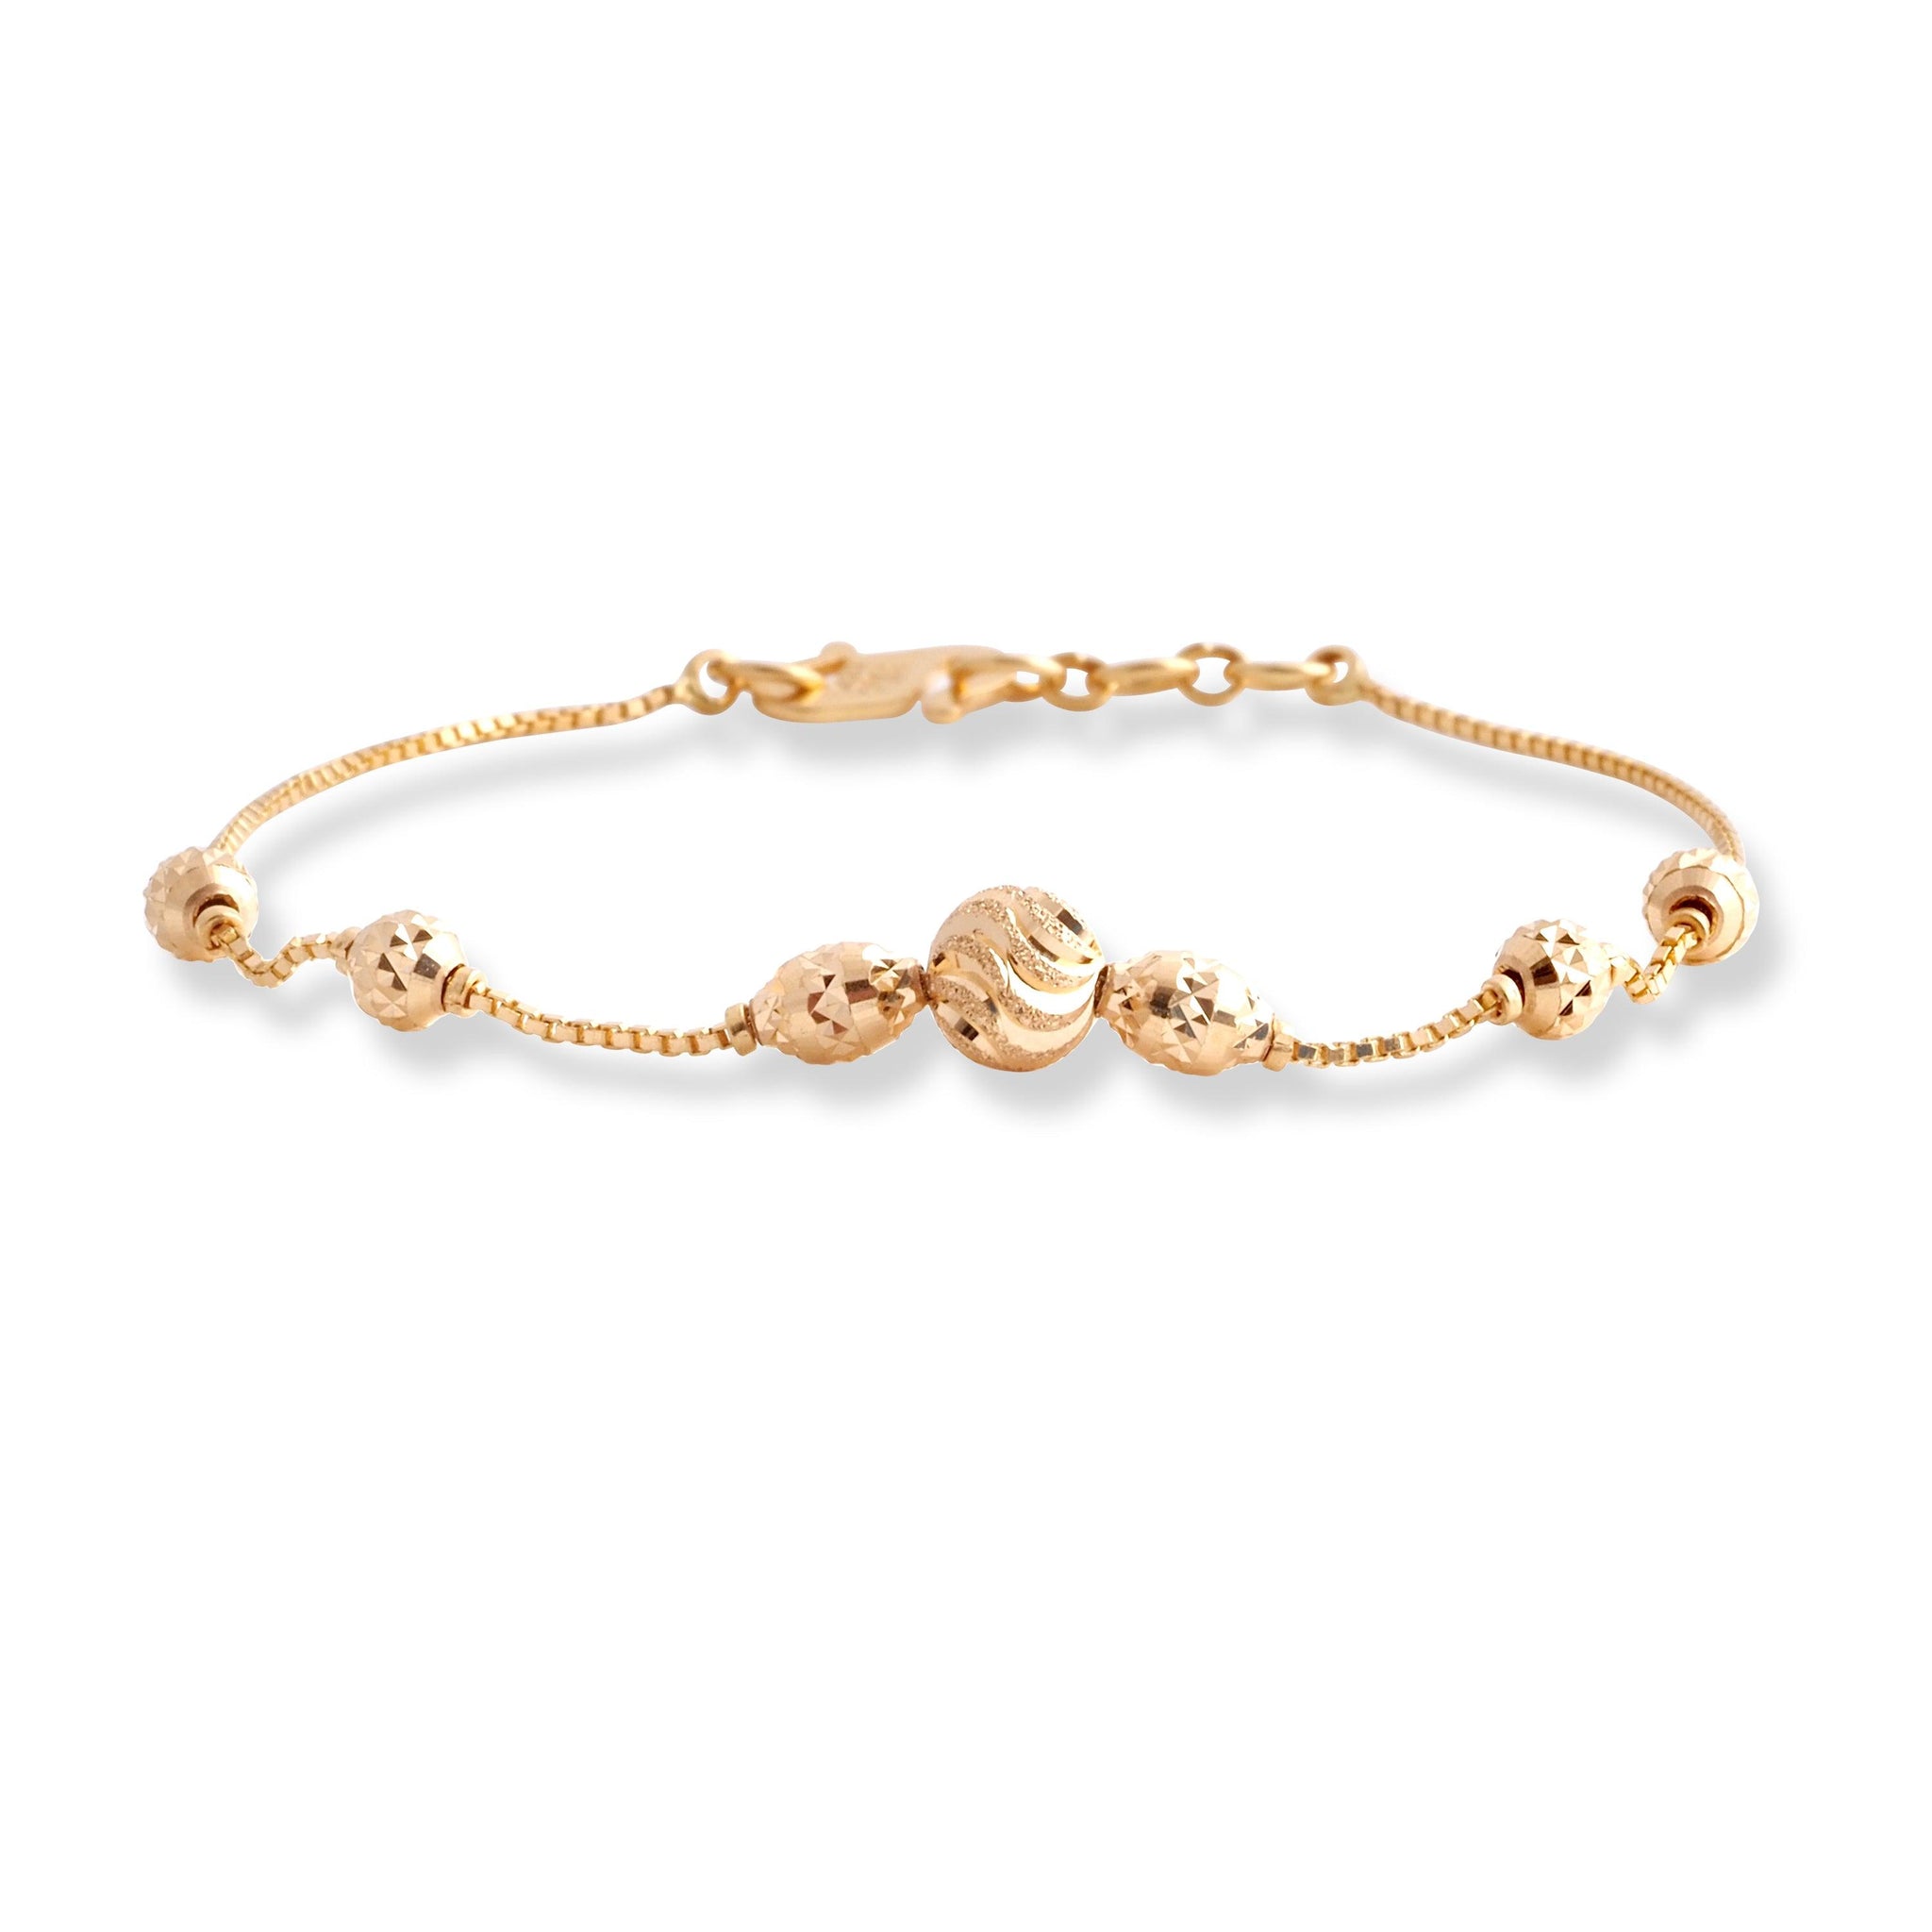 22ct Yellow Gold Bracelet In Diamond Cutting Beads with '' S '' Clasp LBR-8517